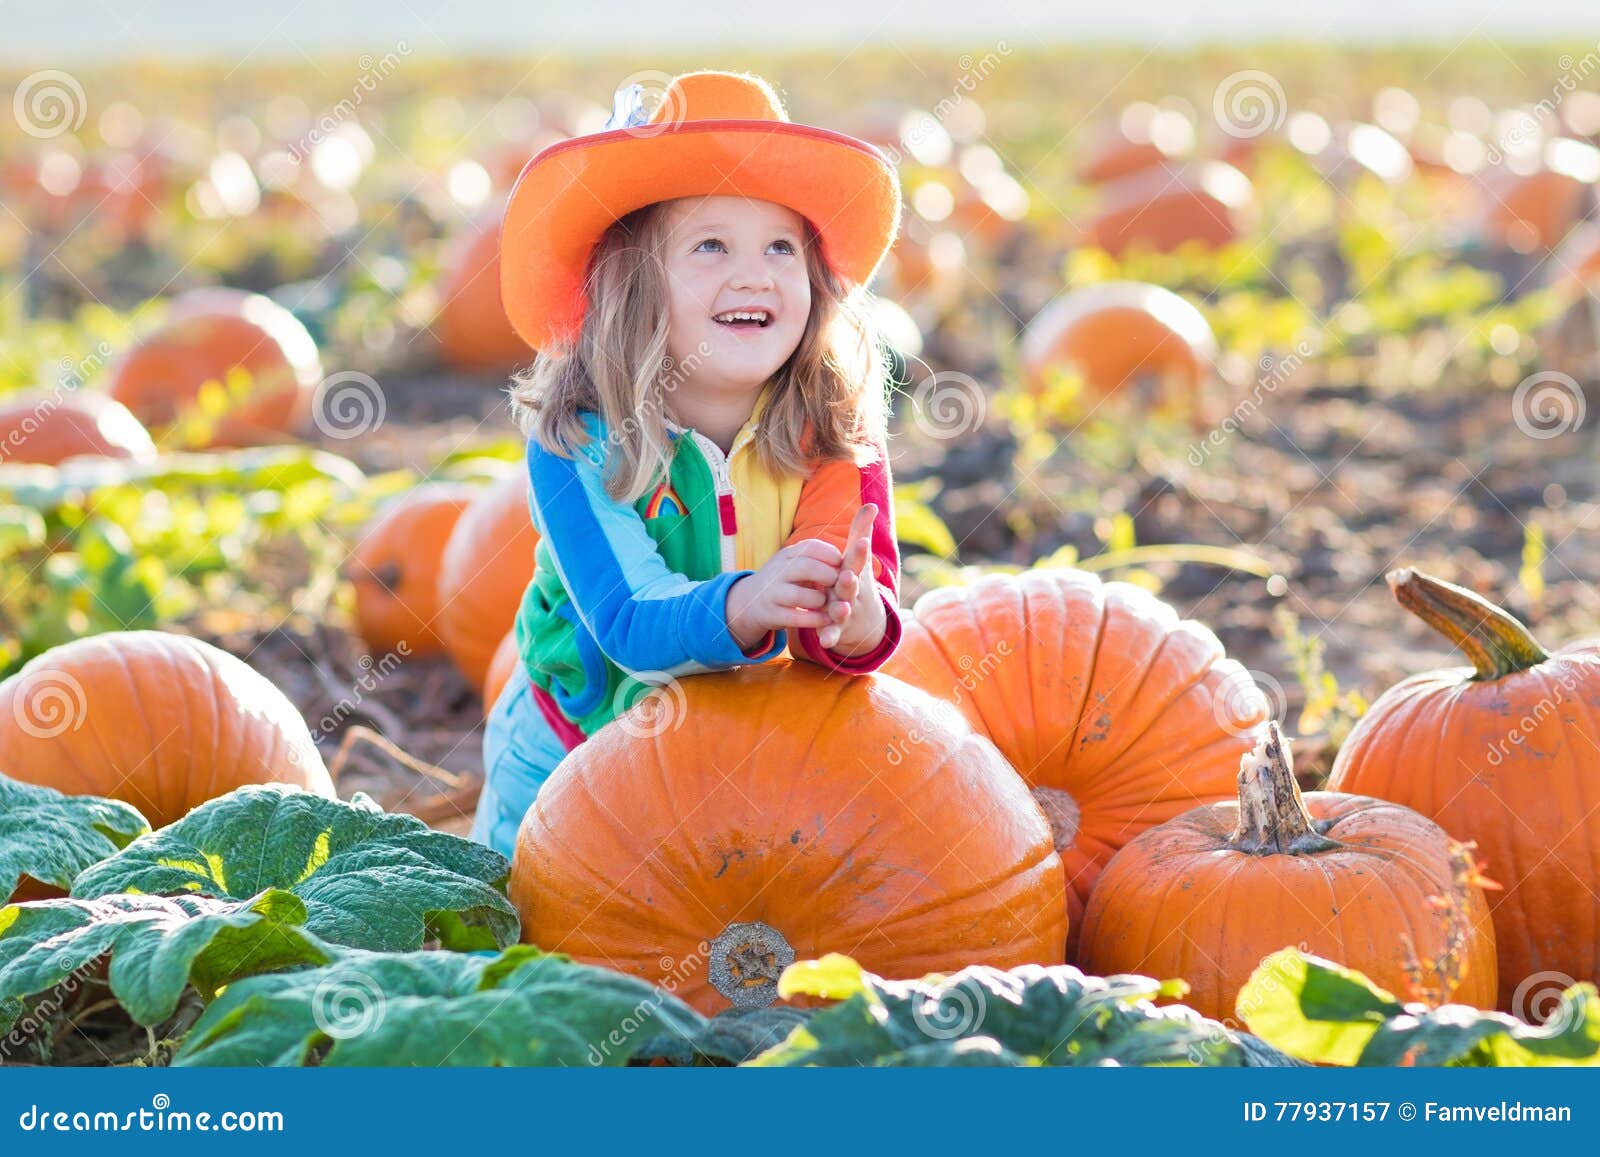 Child Playing on Pumpkin Patch Stock Image - Image of healthy, girl ...